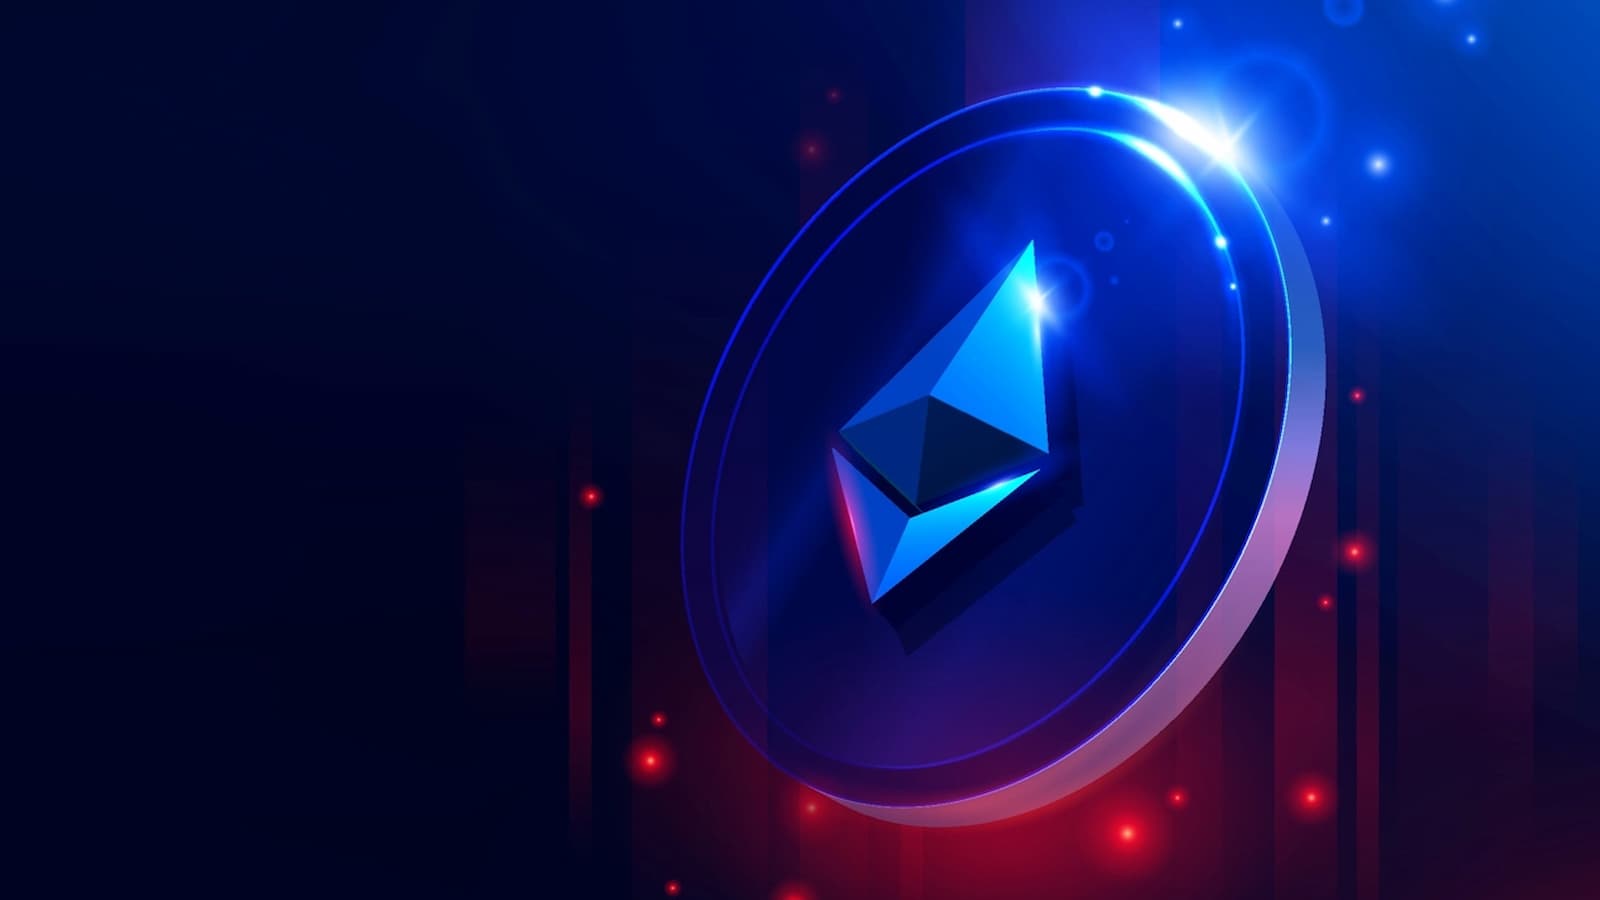 Will Ethereum (ETH) rally another 50% in Q1 2023 or pare the recent gains?